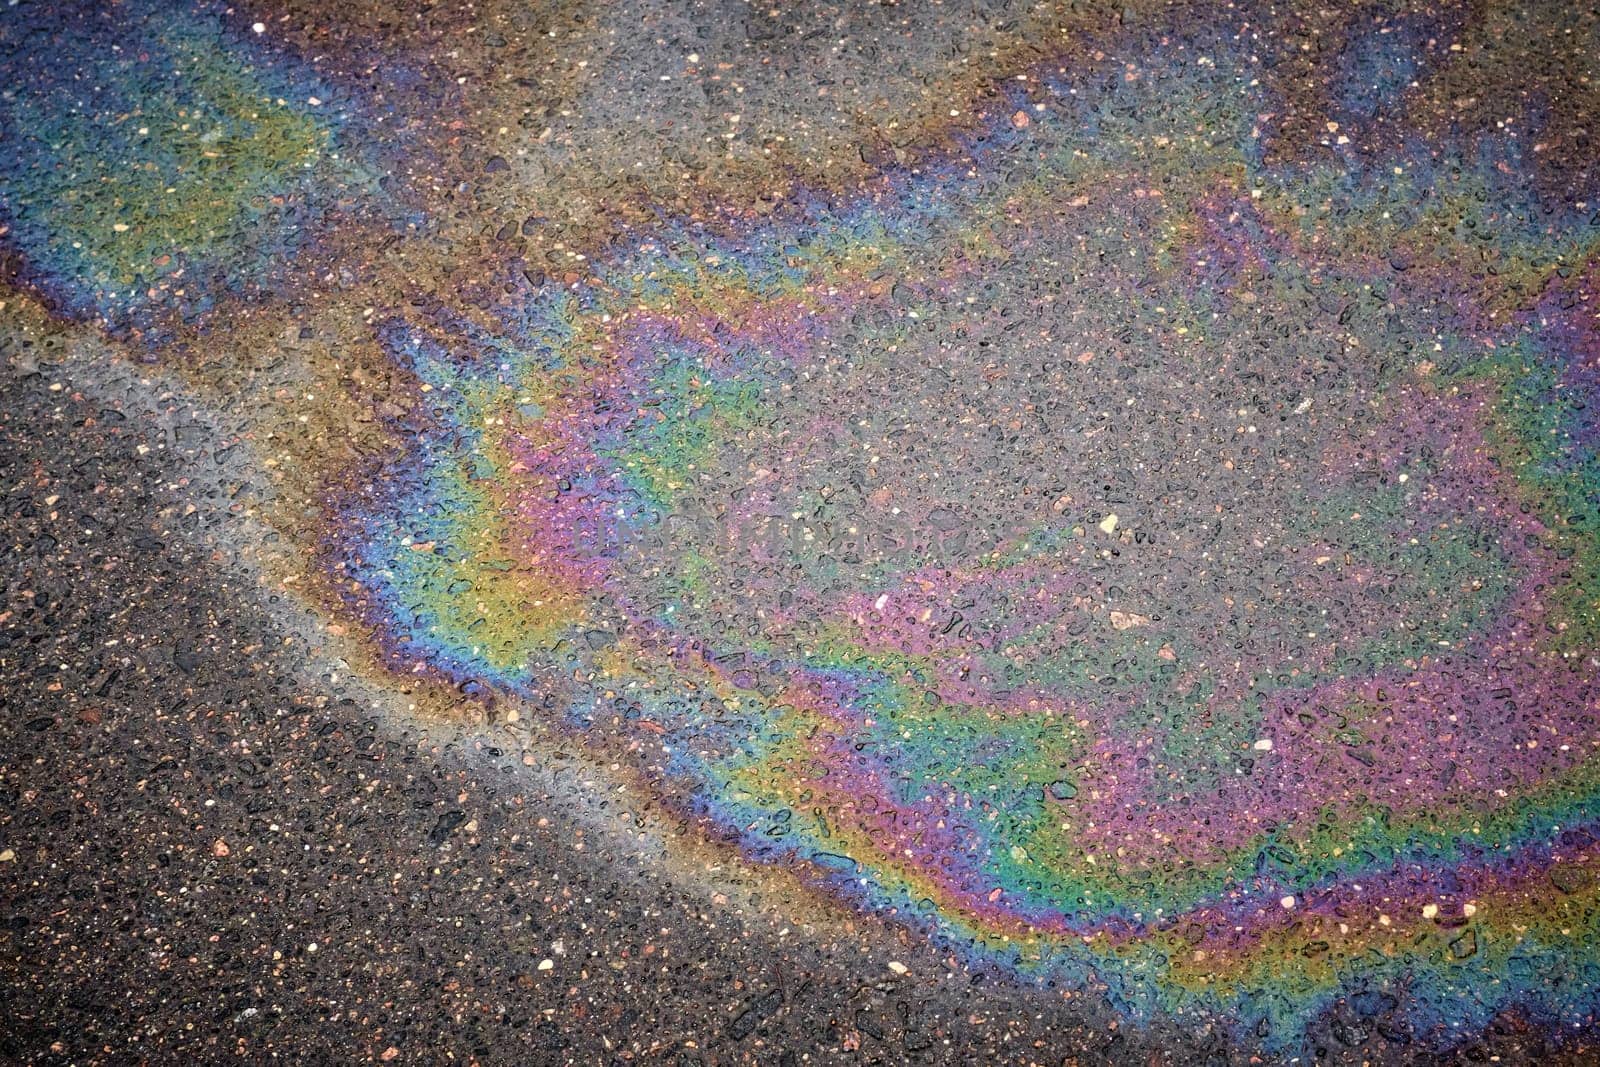 Detailed stain of fuel or oil on wet asphalt during a rainy day, emphasizing environmental pollution.